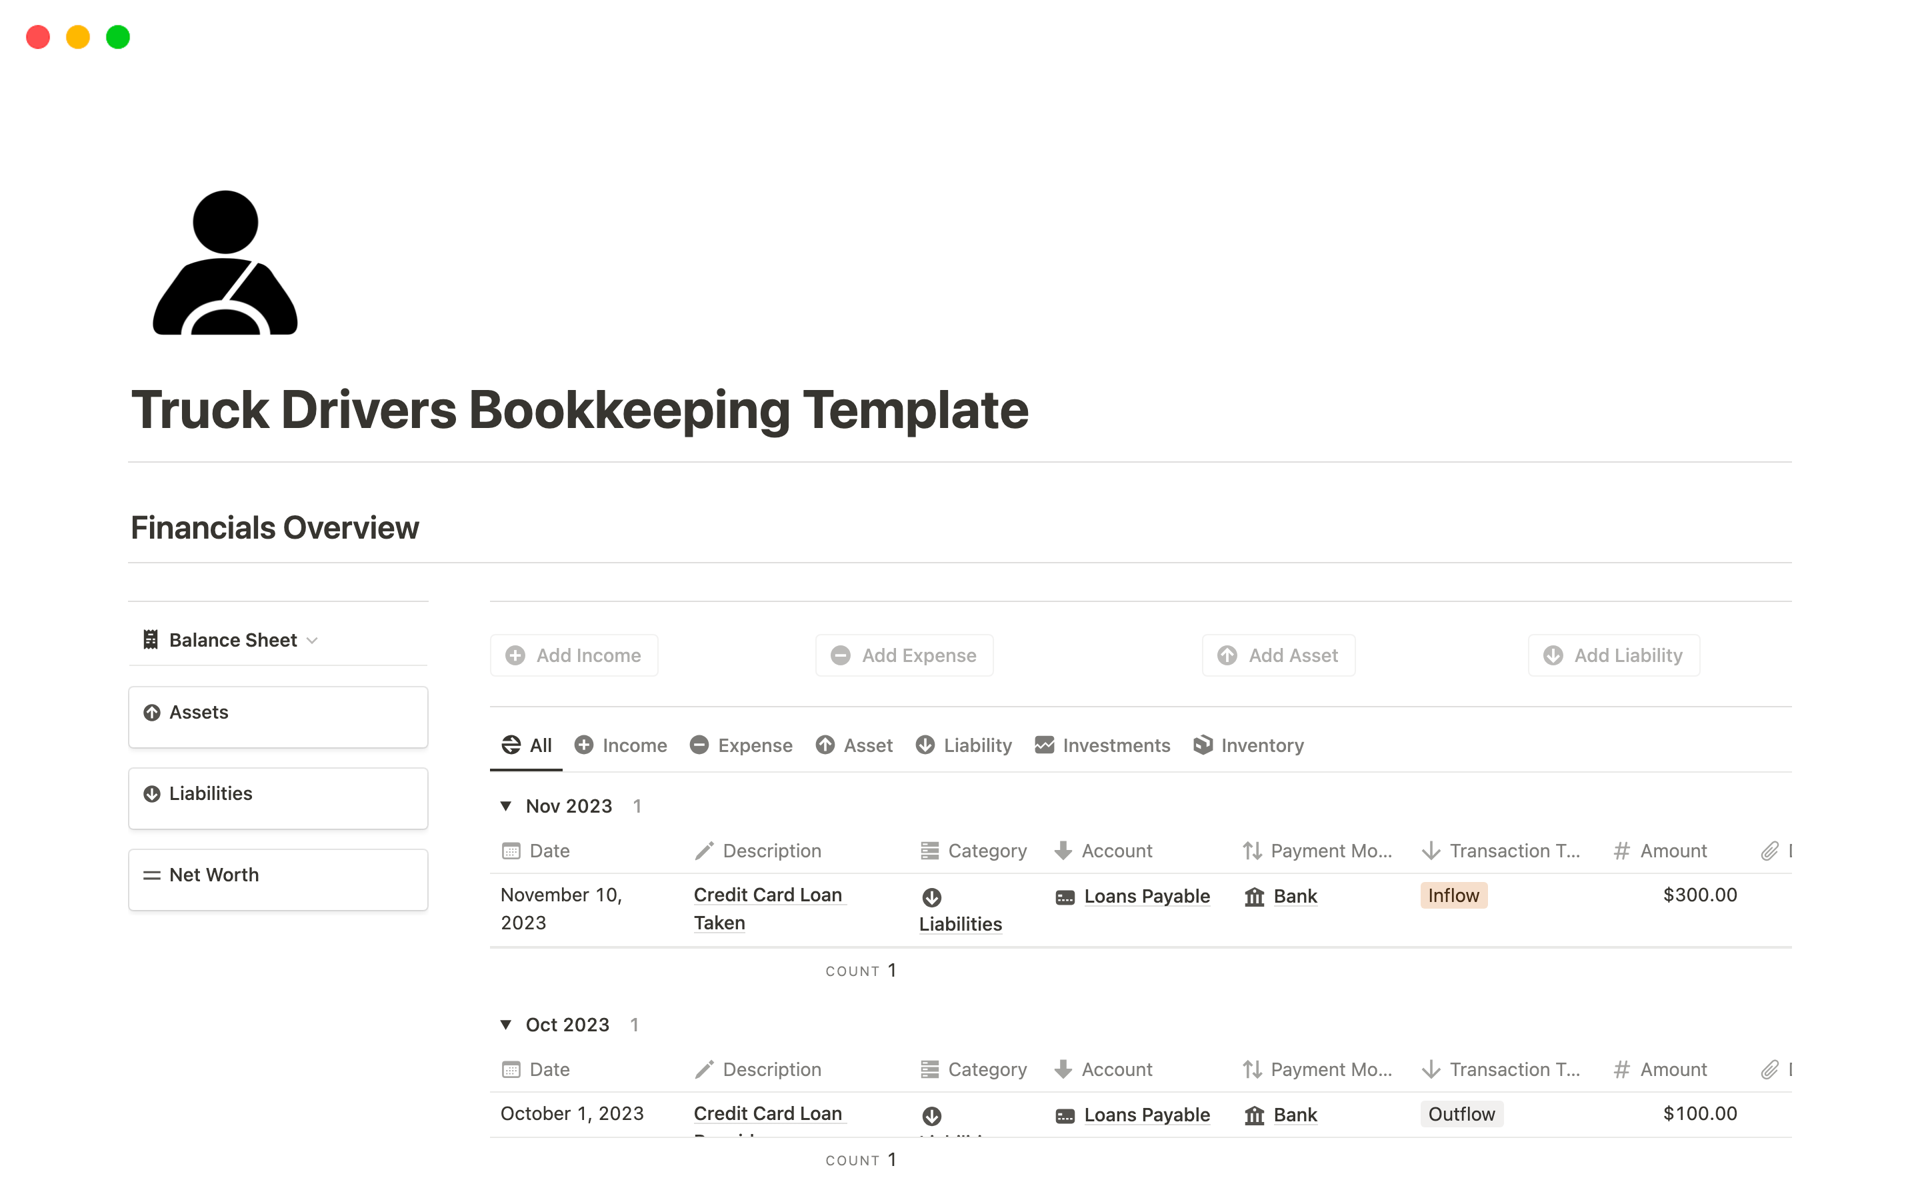 This bookkeeping template provides the best solution for truck owners to manage their business finances, produce income statement, balance sheet, cash flow statement and much more on a periodical basis. 